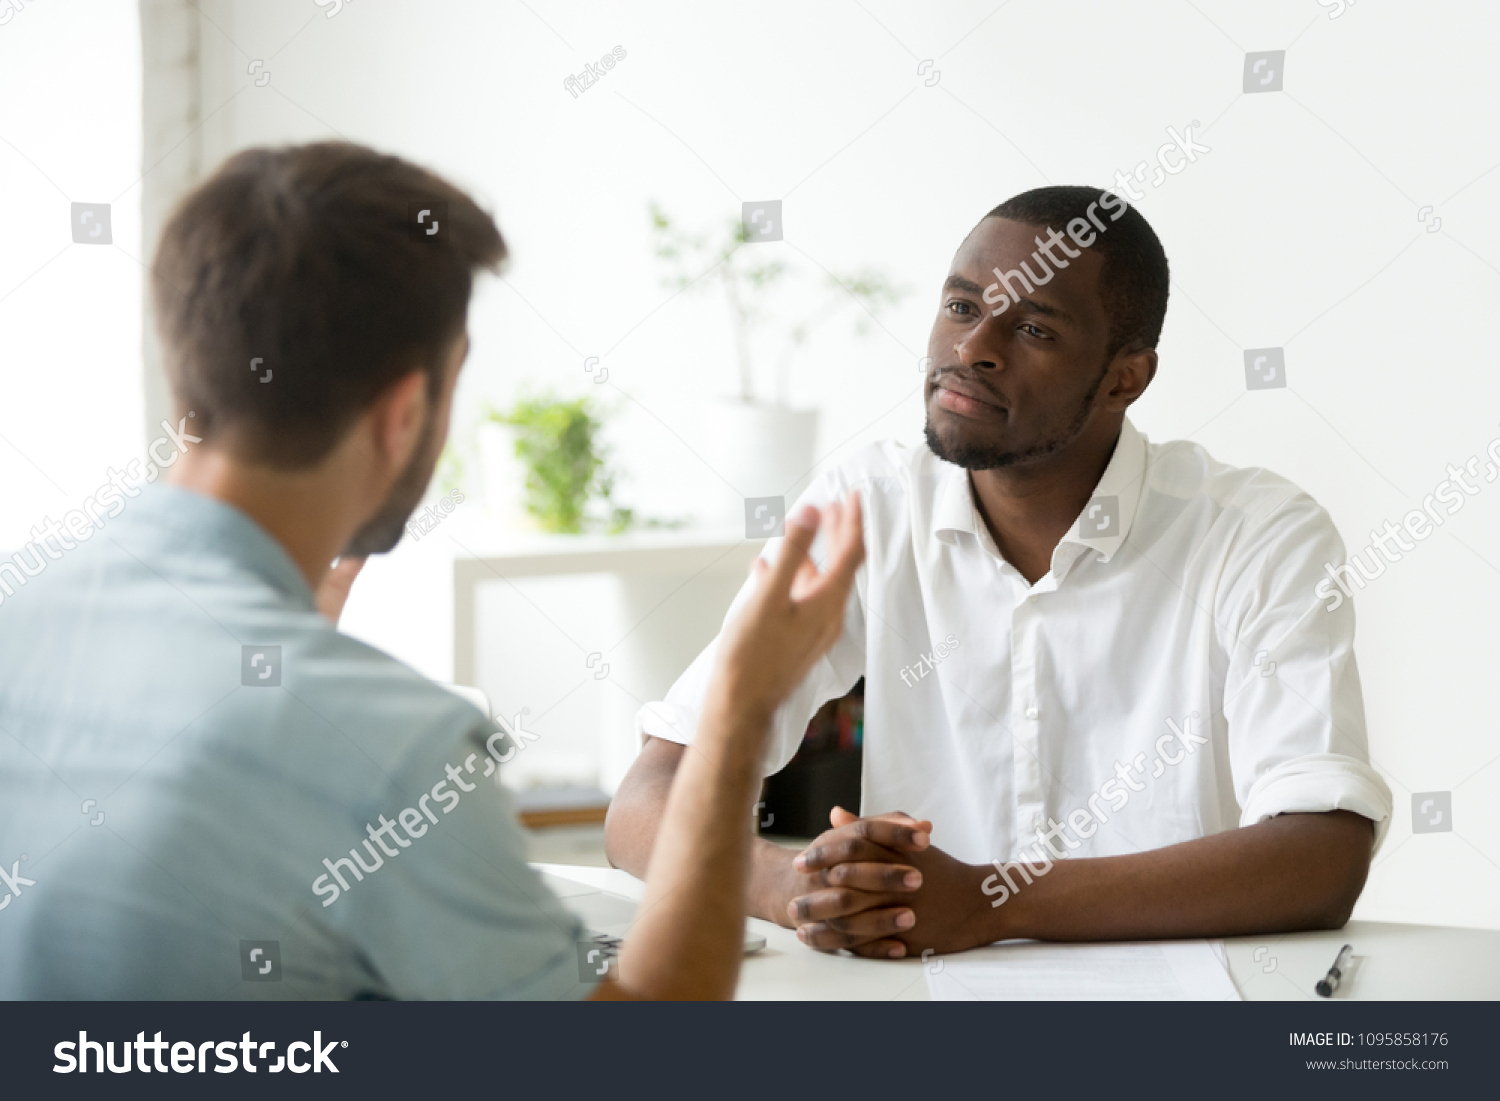 African American employer listening attentively to caucasian job applicant talking at work interview, being friendly and interested to candidate. Concept of recruiting, employment, hiring #1095858176